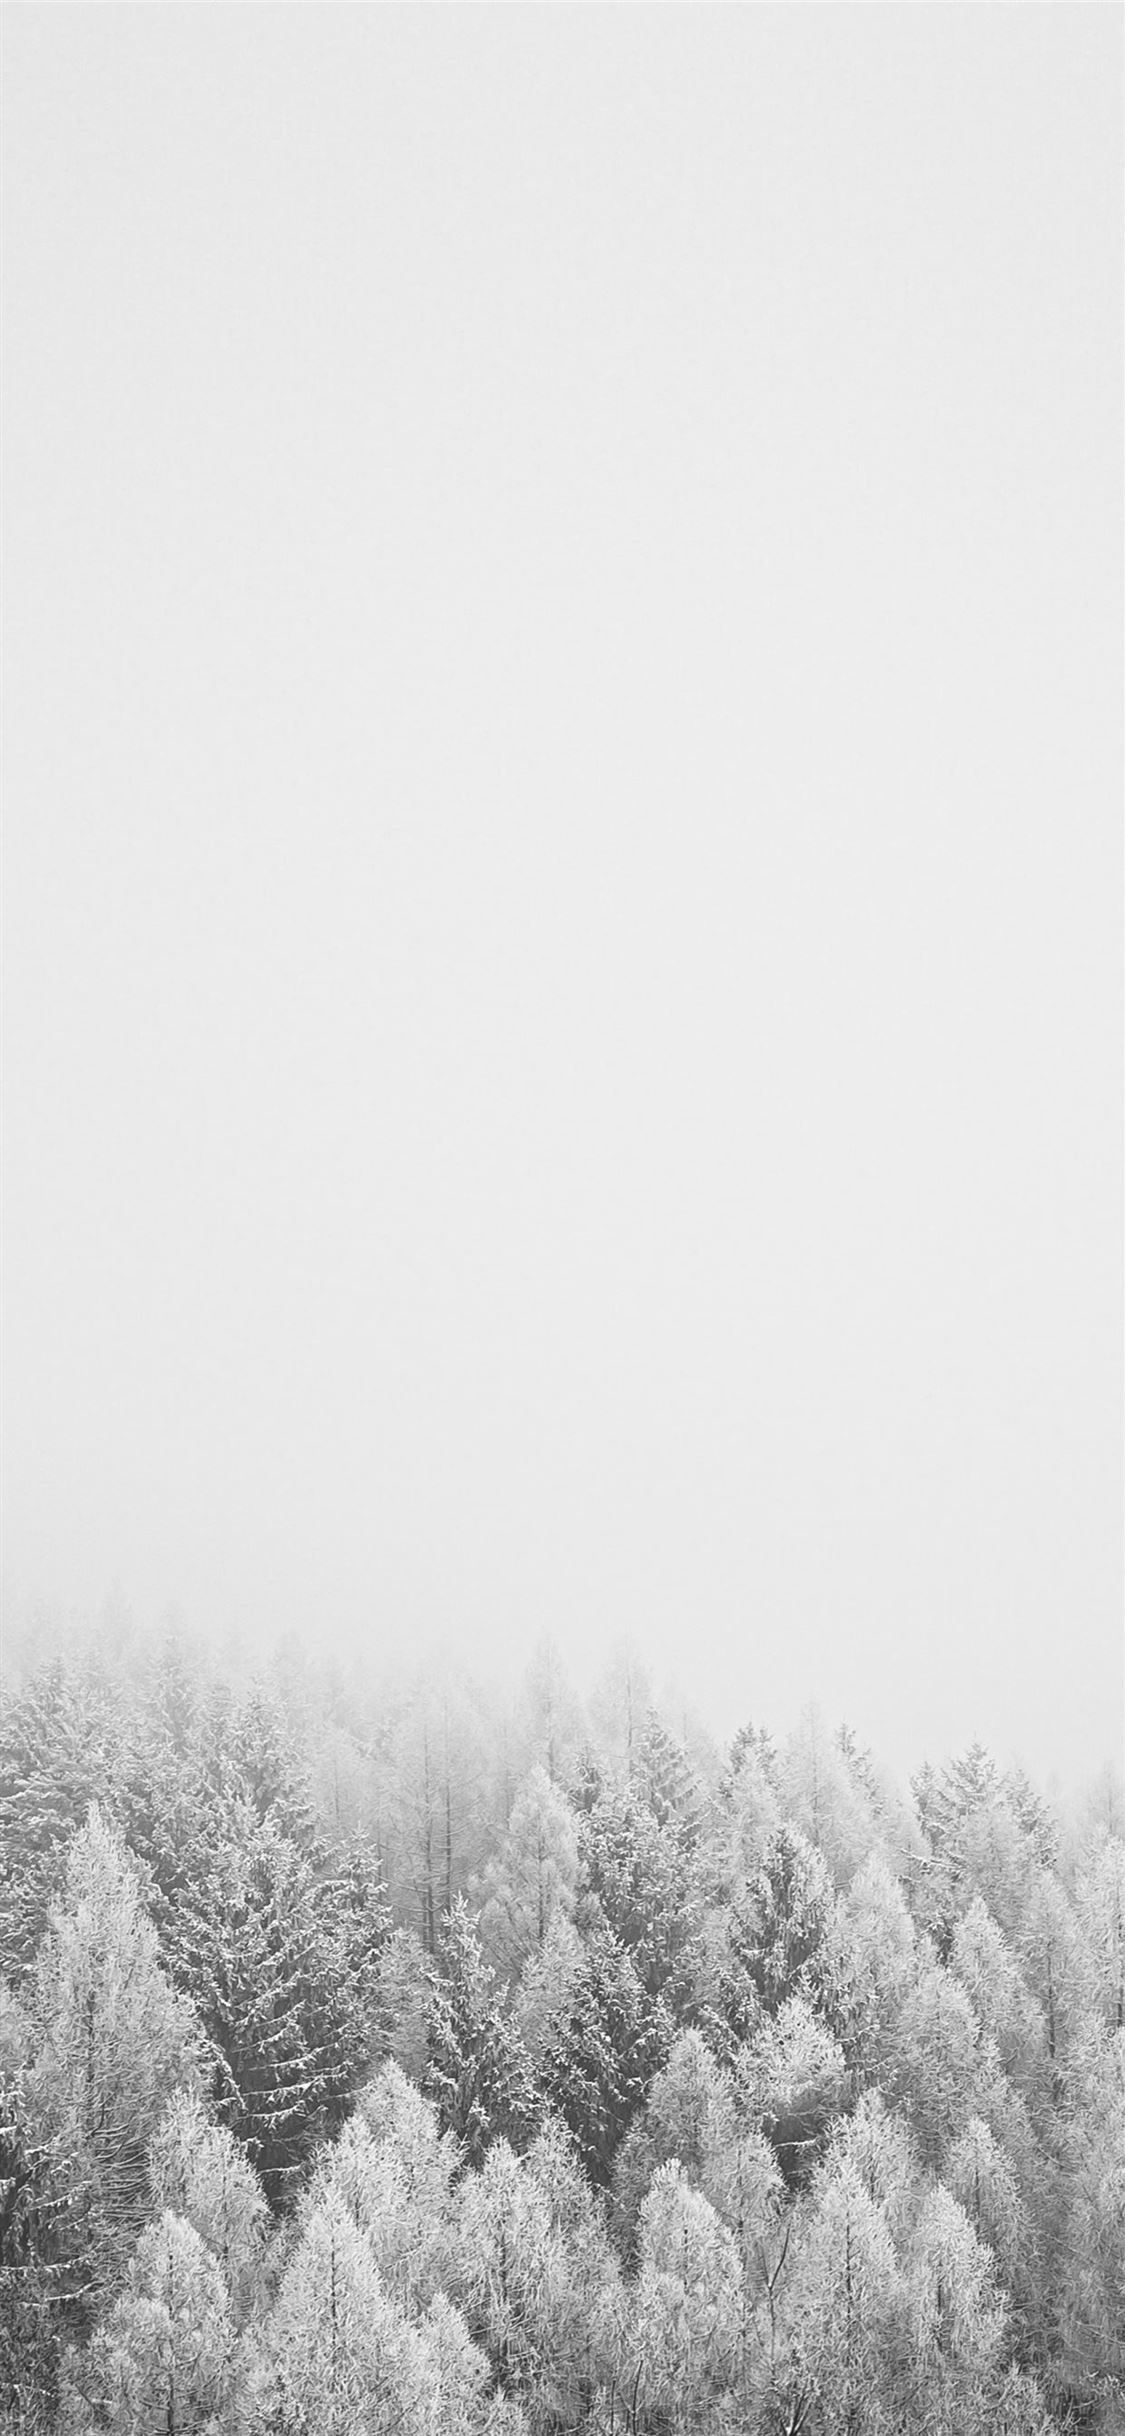 Snow Covered Trees During Daytime #grey #black And White #nature #tree #snow #iPhone11W. Winter Wallpaper, Black And White Wallpaper Iphone, Snow Wallpaper Iphone